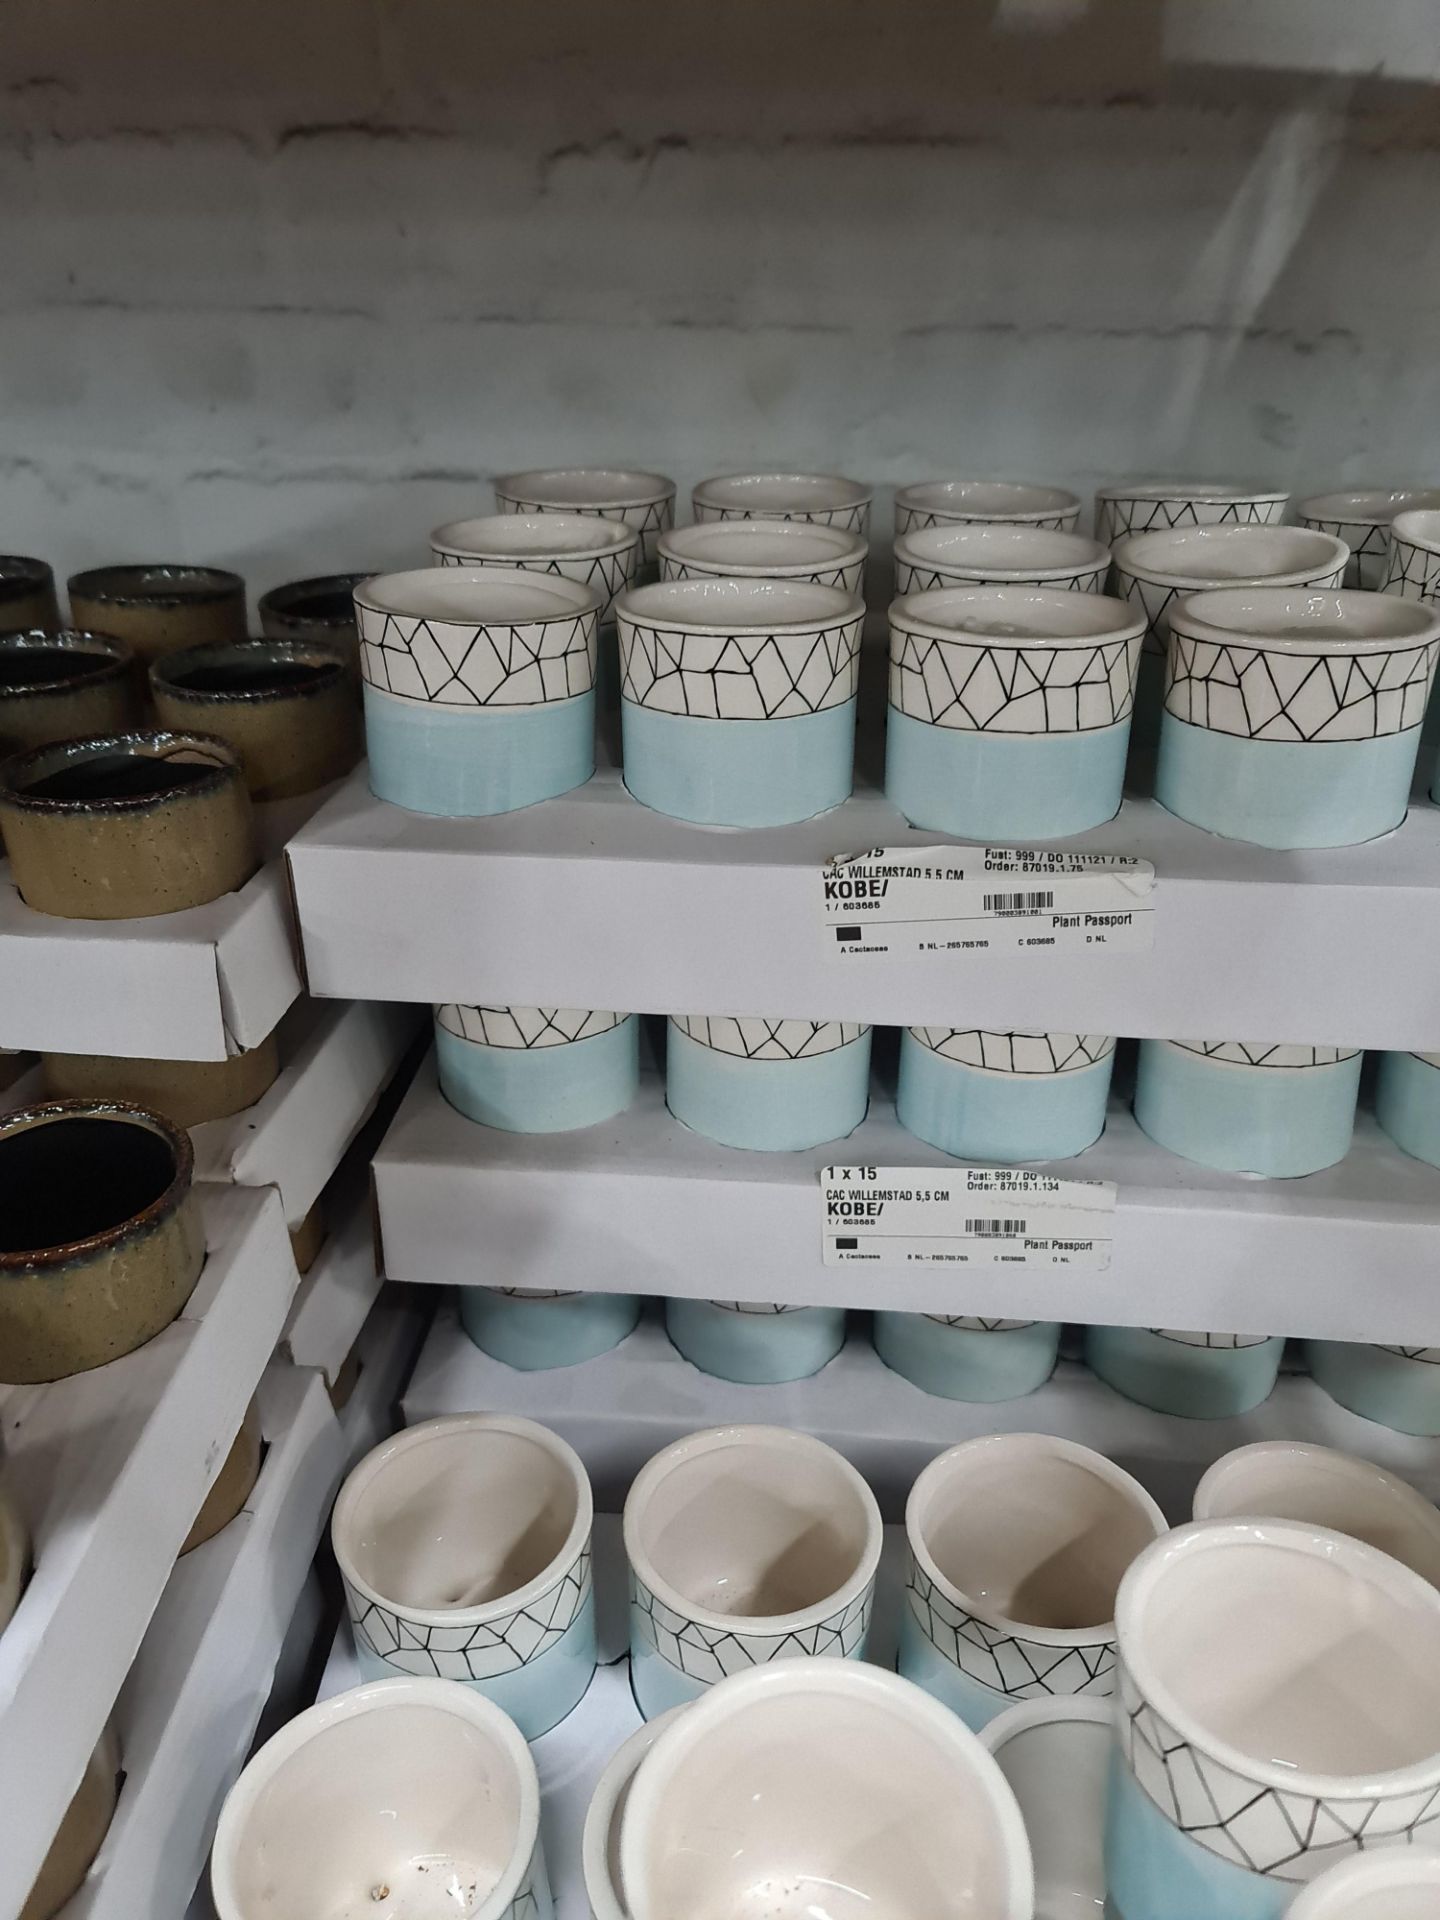 4 trays of Kobe 5.5cm blue patterned pots each standing on 3 legs, approximately 63 pots in total - Image 6 of 6